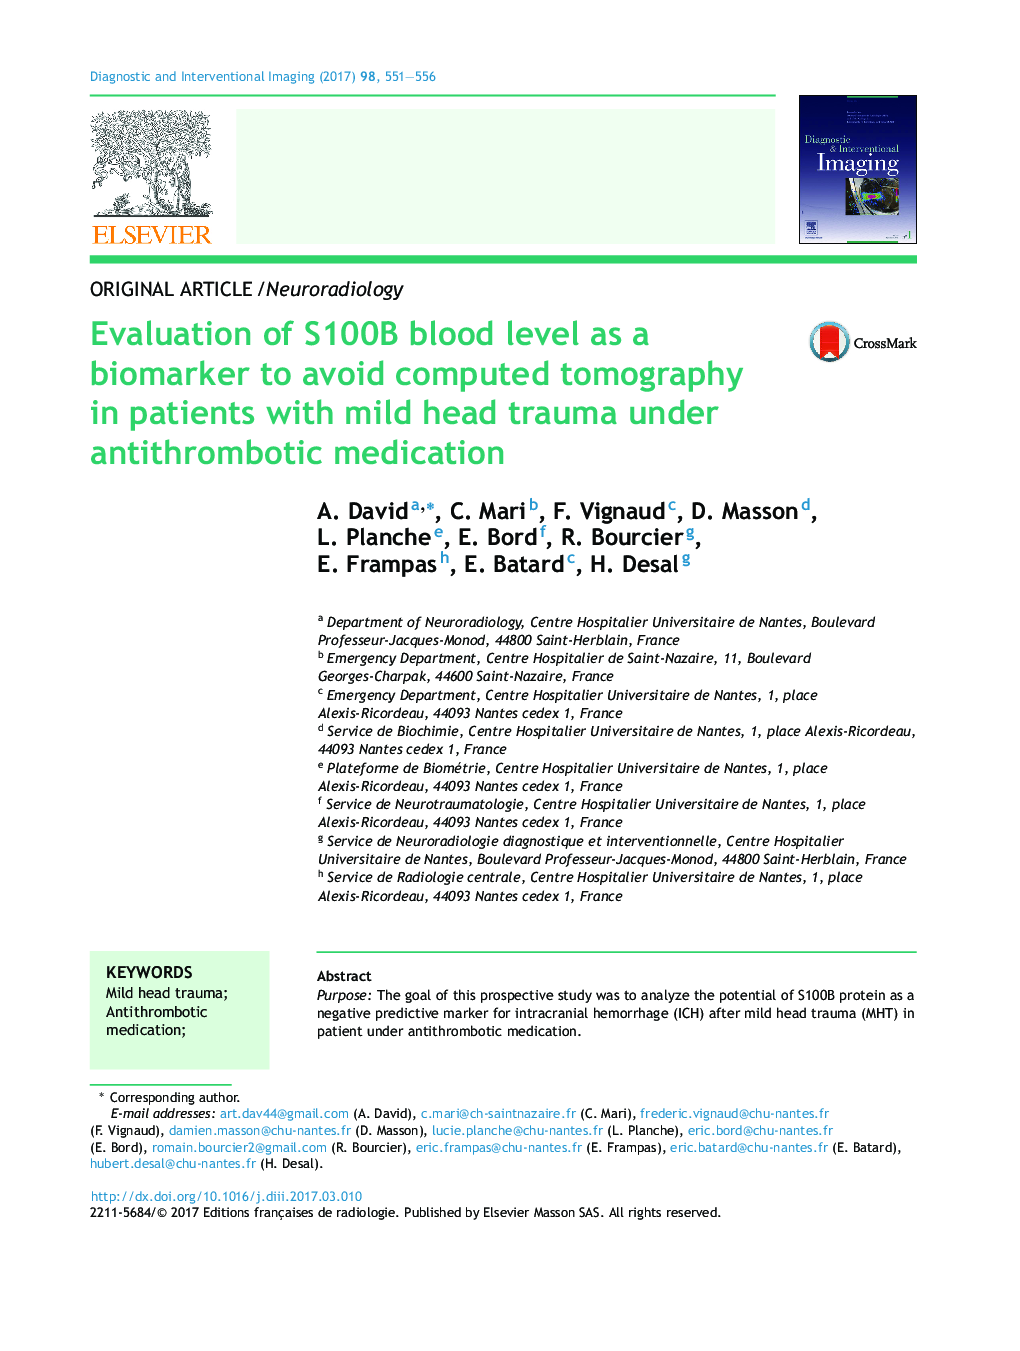 Evaluation of S100B blood level as a biomarker to avoid computed tomography in patients with mild head trauma under antithrombotic medication